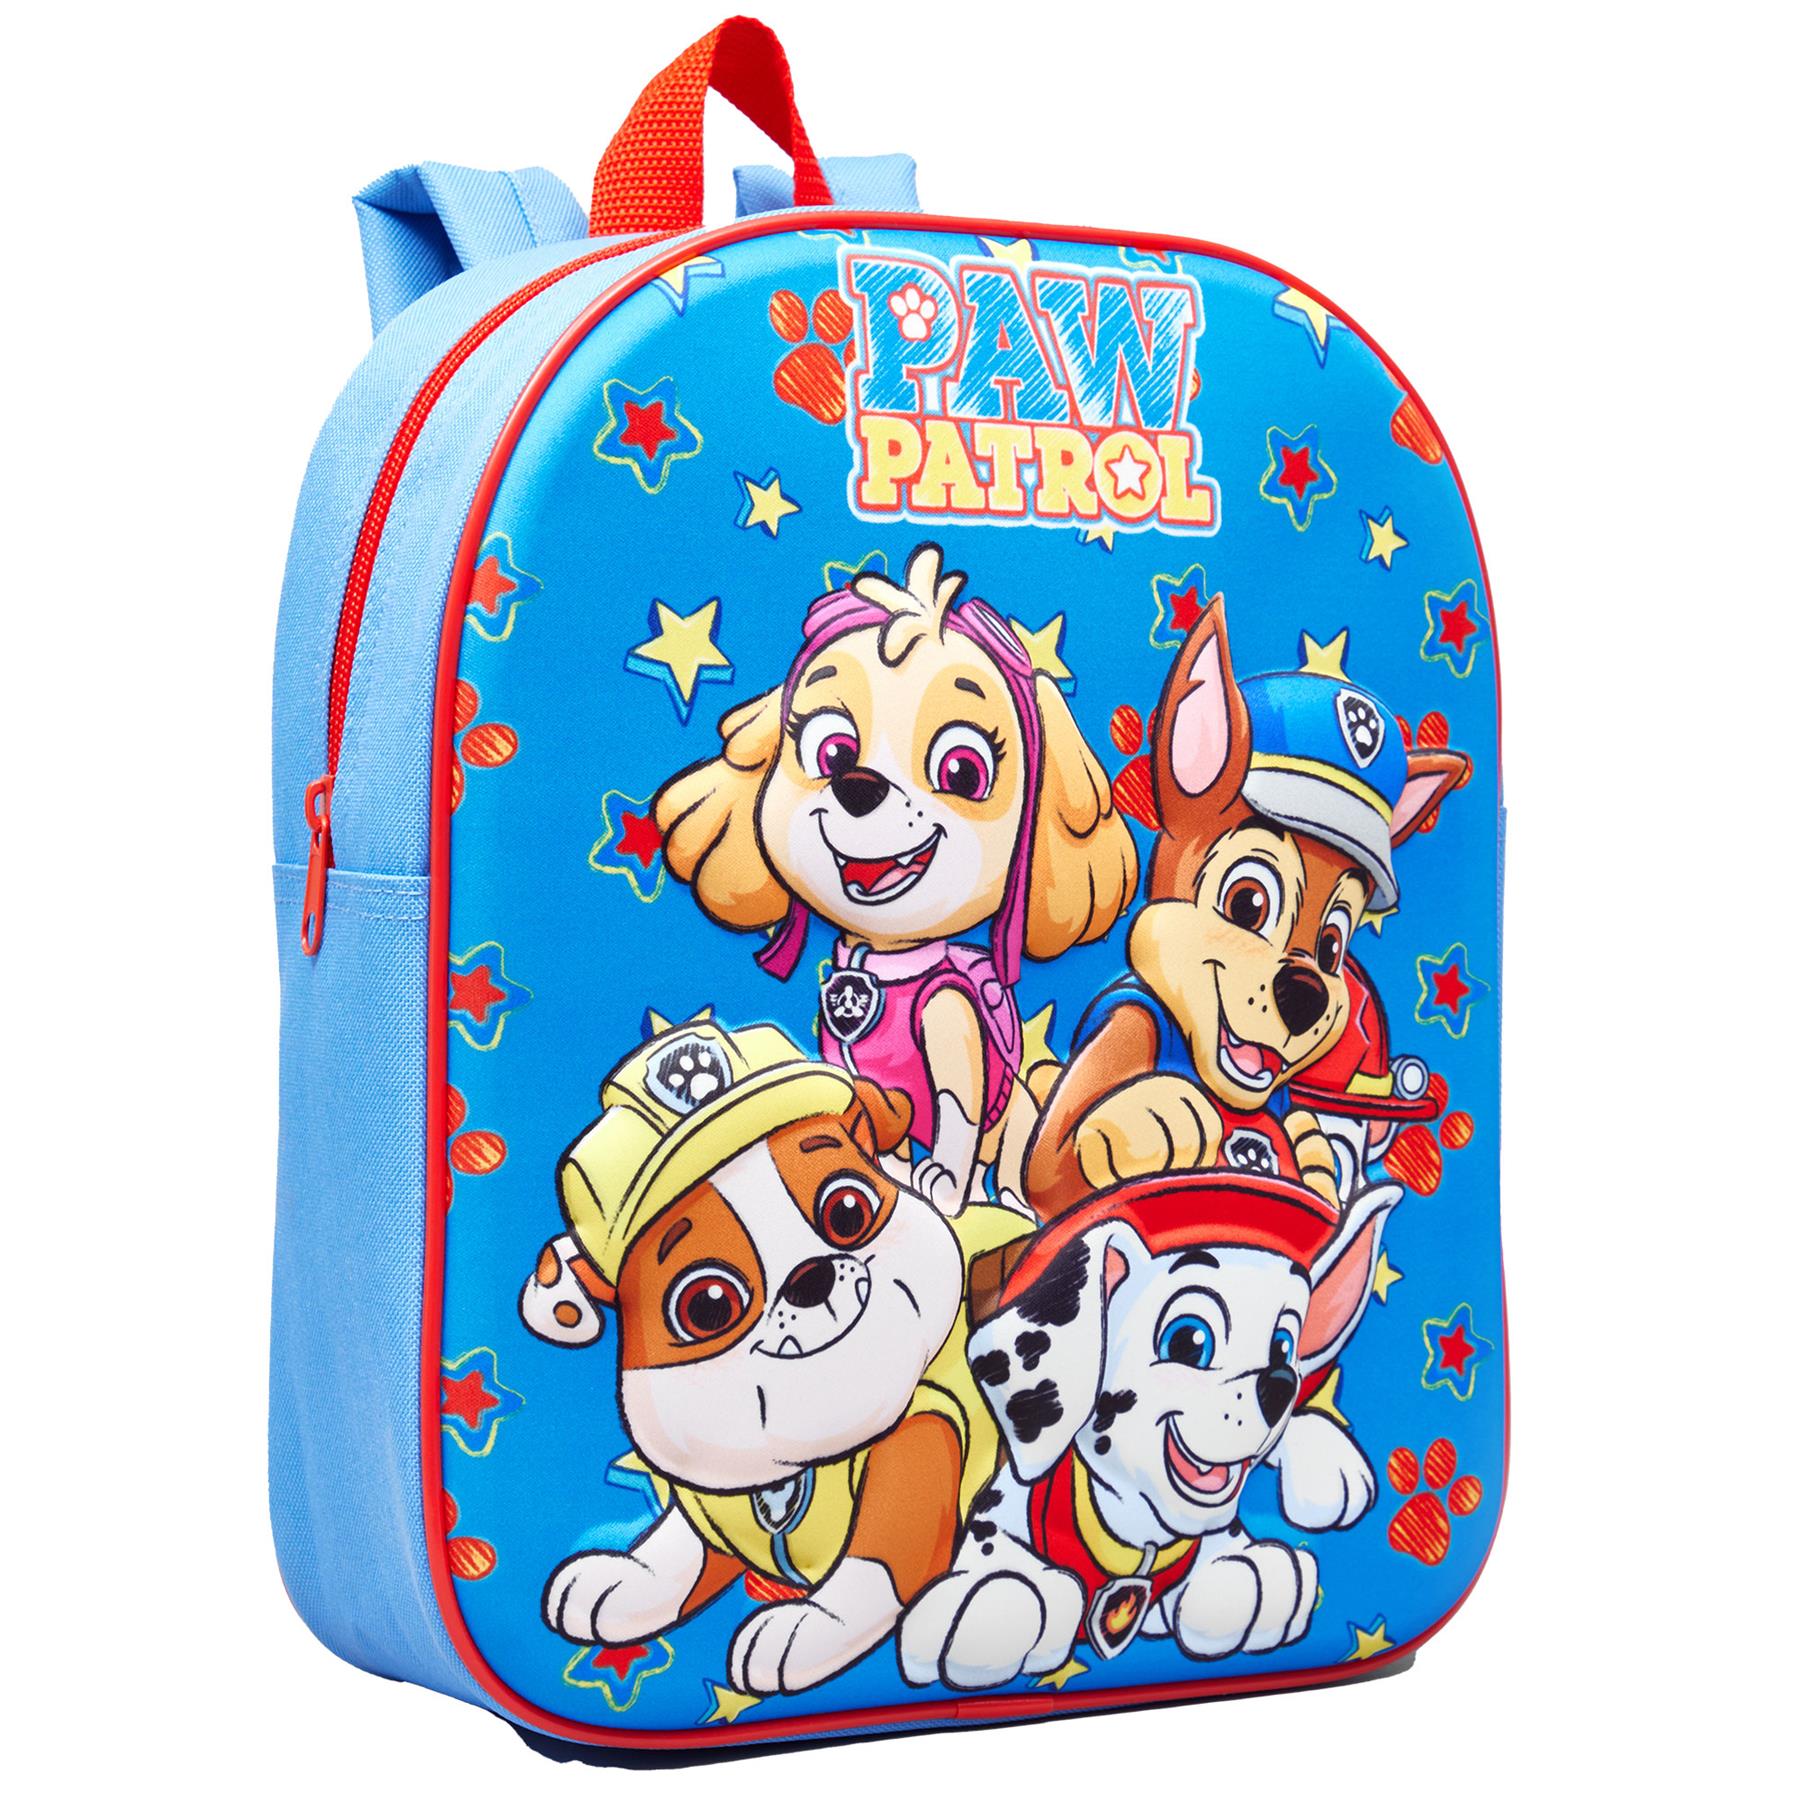 Kids Officially Licensed Paw Patrol Sketch Eva Character School Travel Backpack